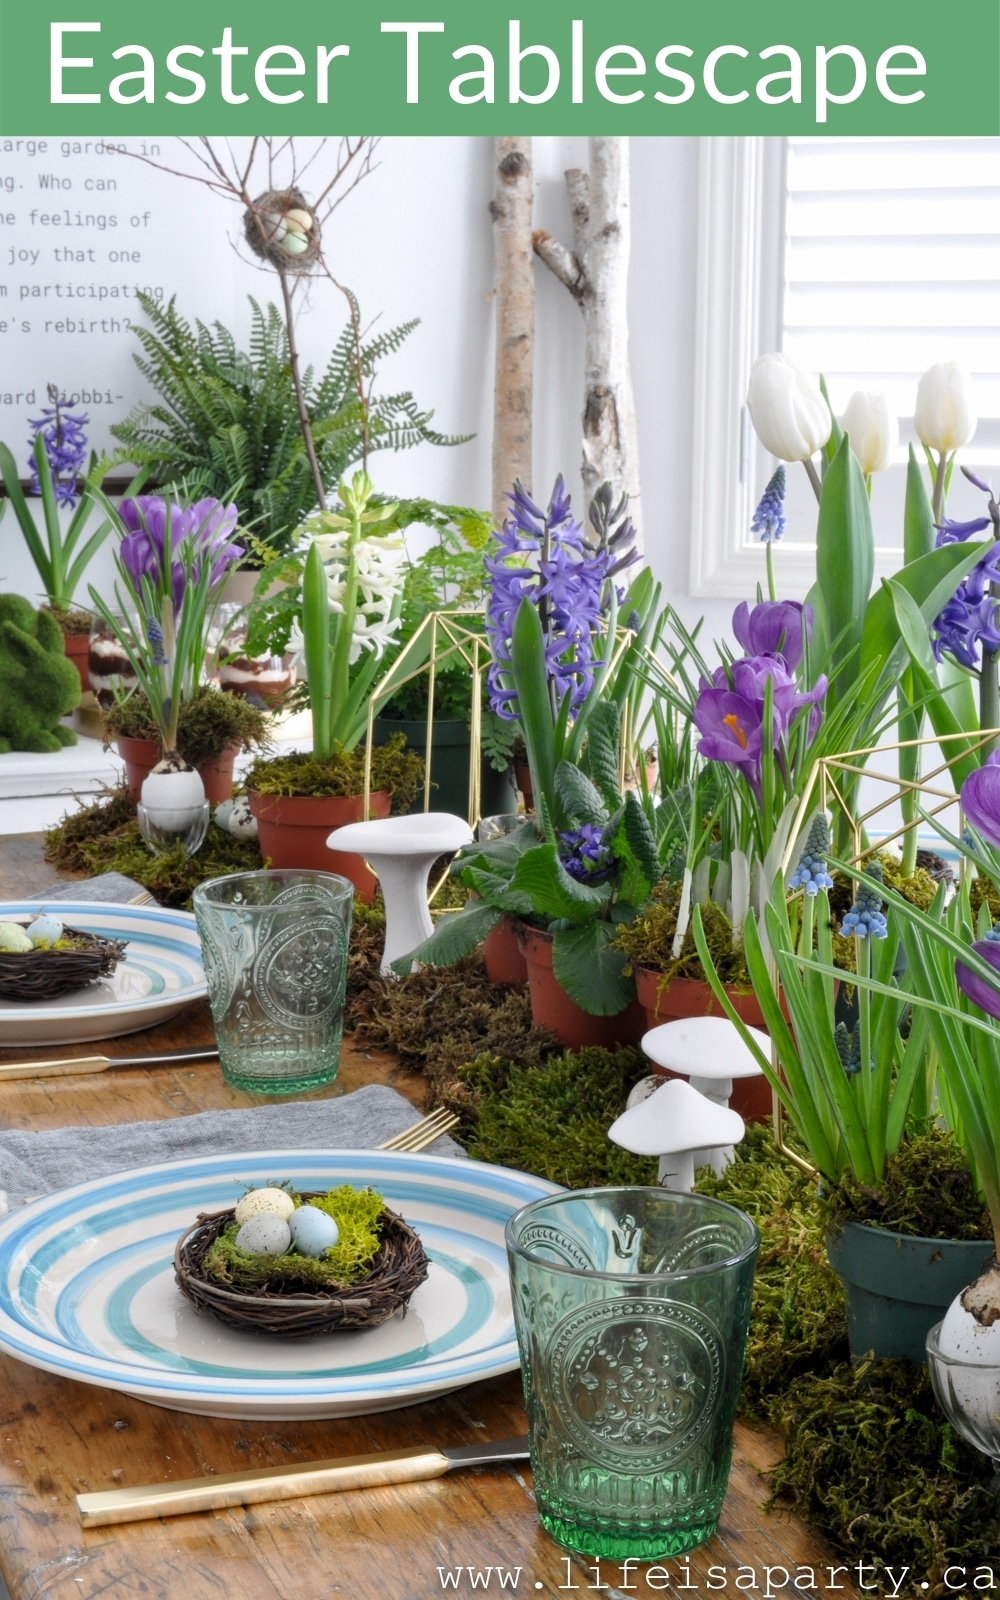 Easter Tablescape: a DIY moss table runner, spring bulbs, eggs, nests, blues, greens and purples create the perfect woodland spring table.